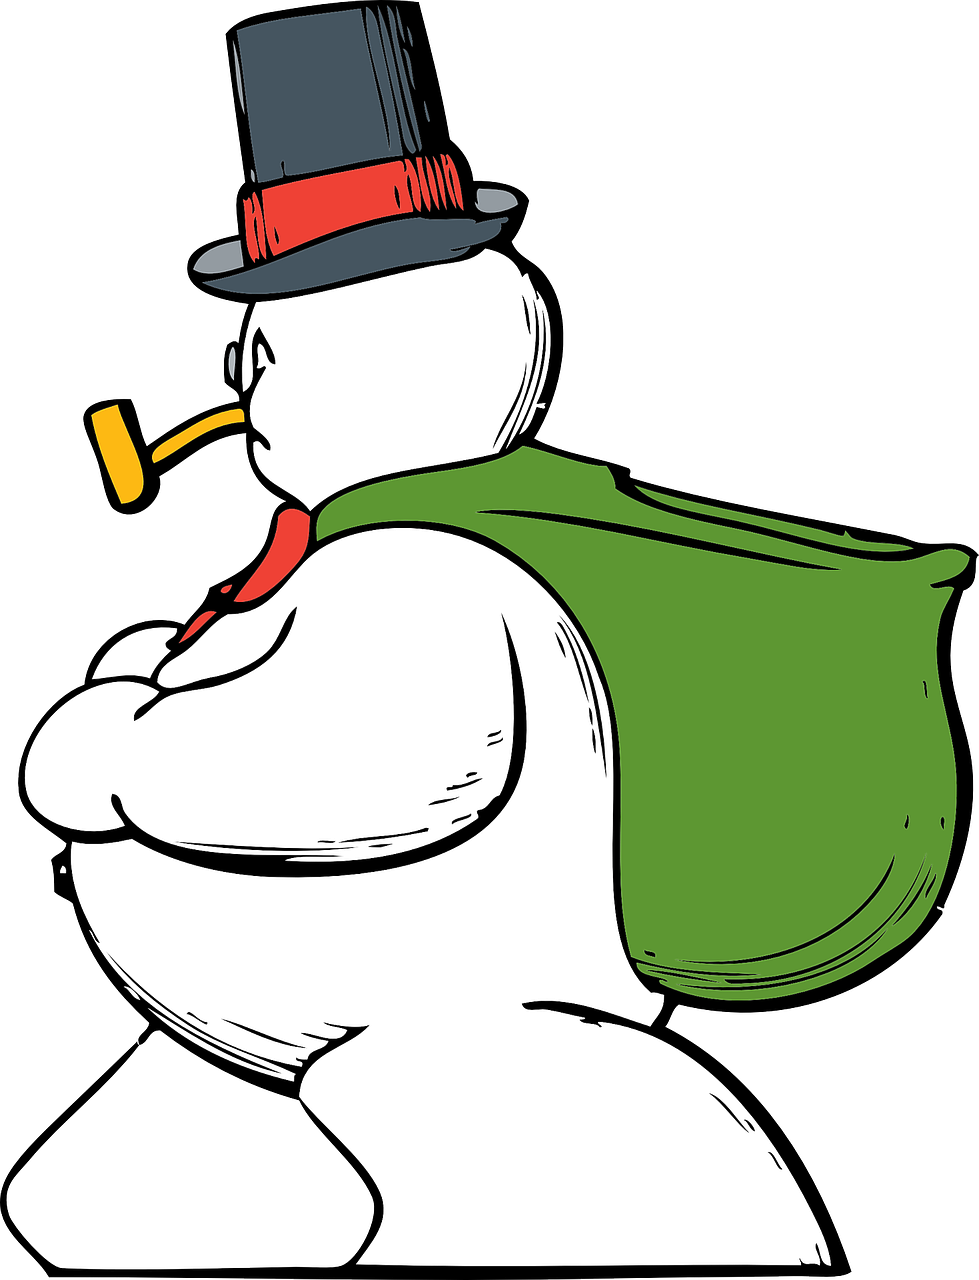 a snowman in a top hat with a pipe in his mouth, inspired by Tex Avery, pixabay, digital art, the man have a backpack, fat figure, colored lineart, shot from the side